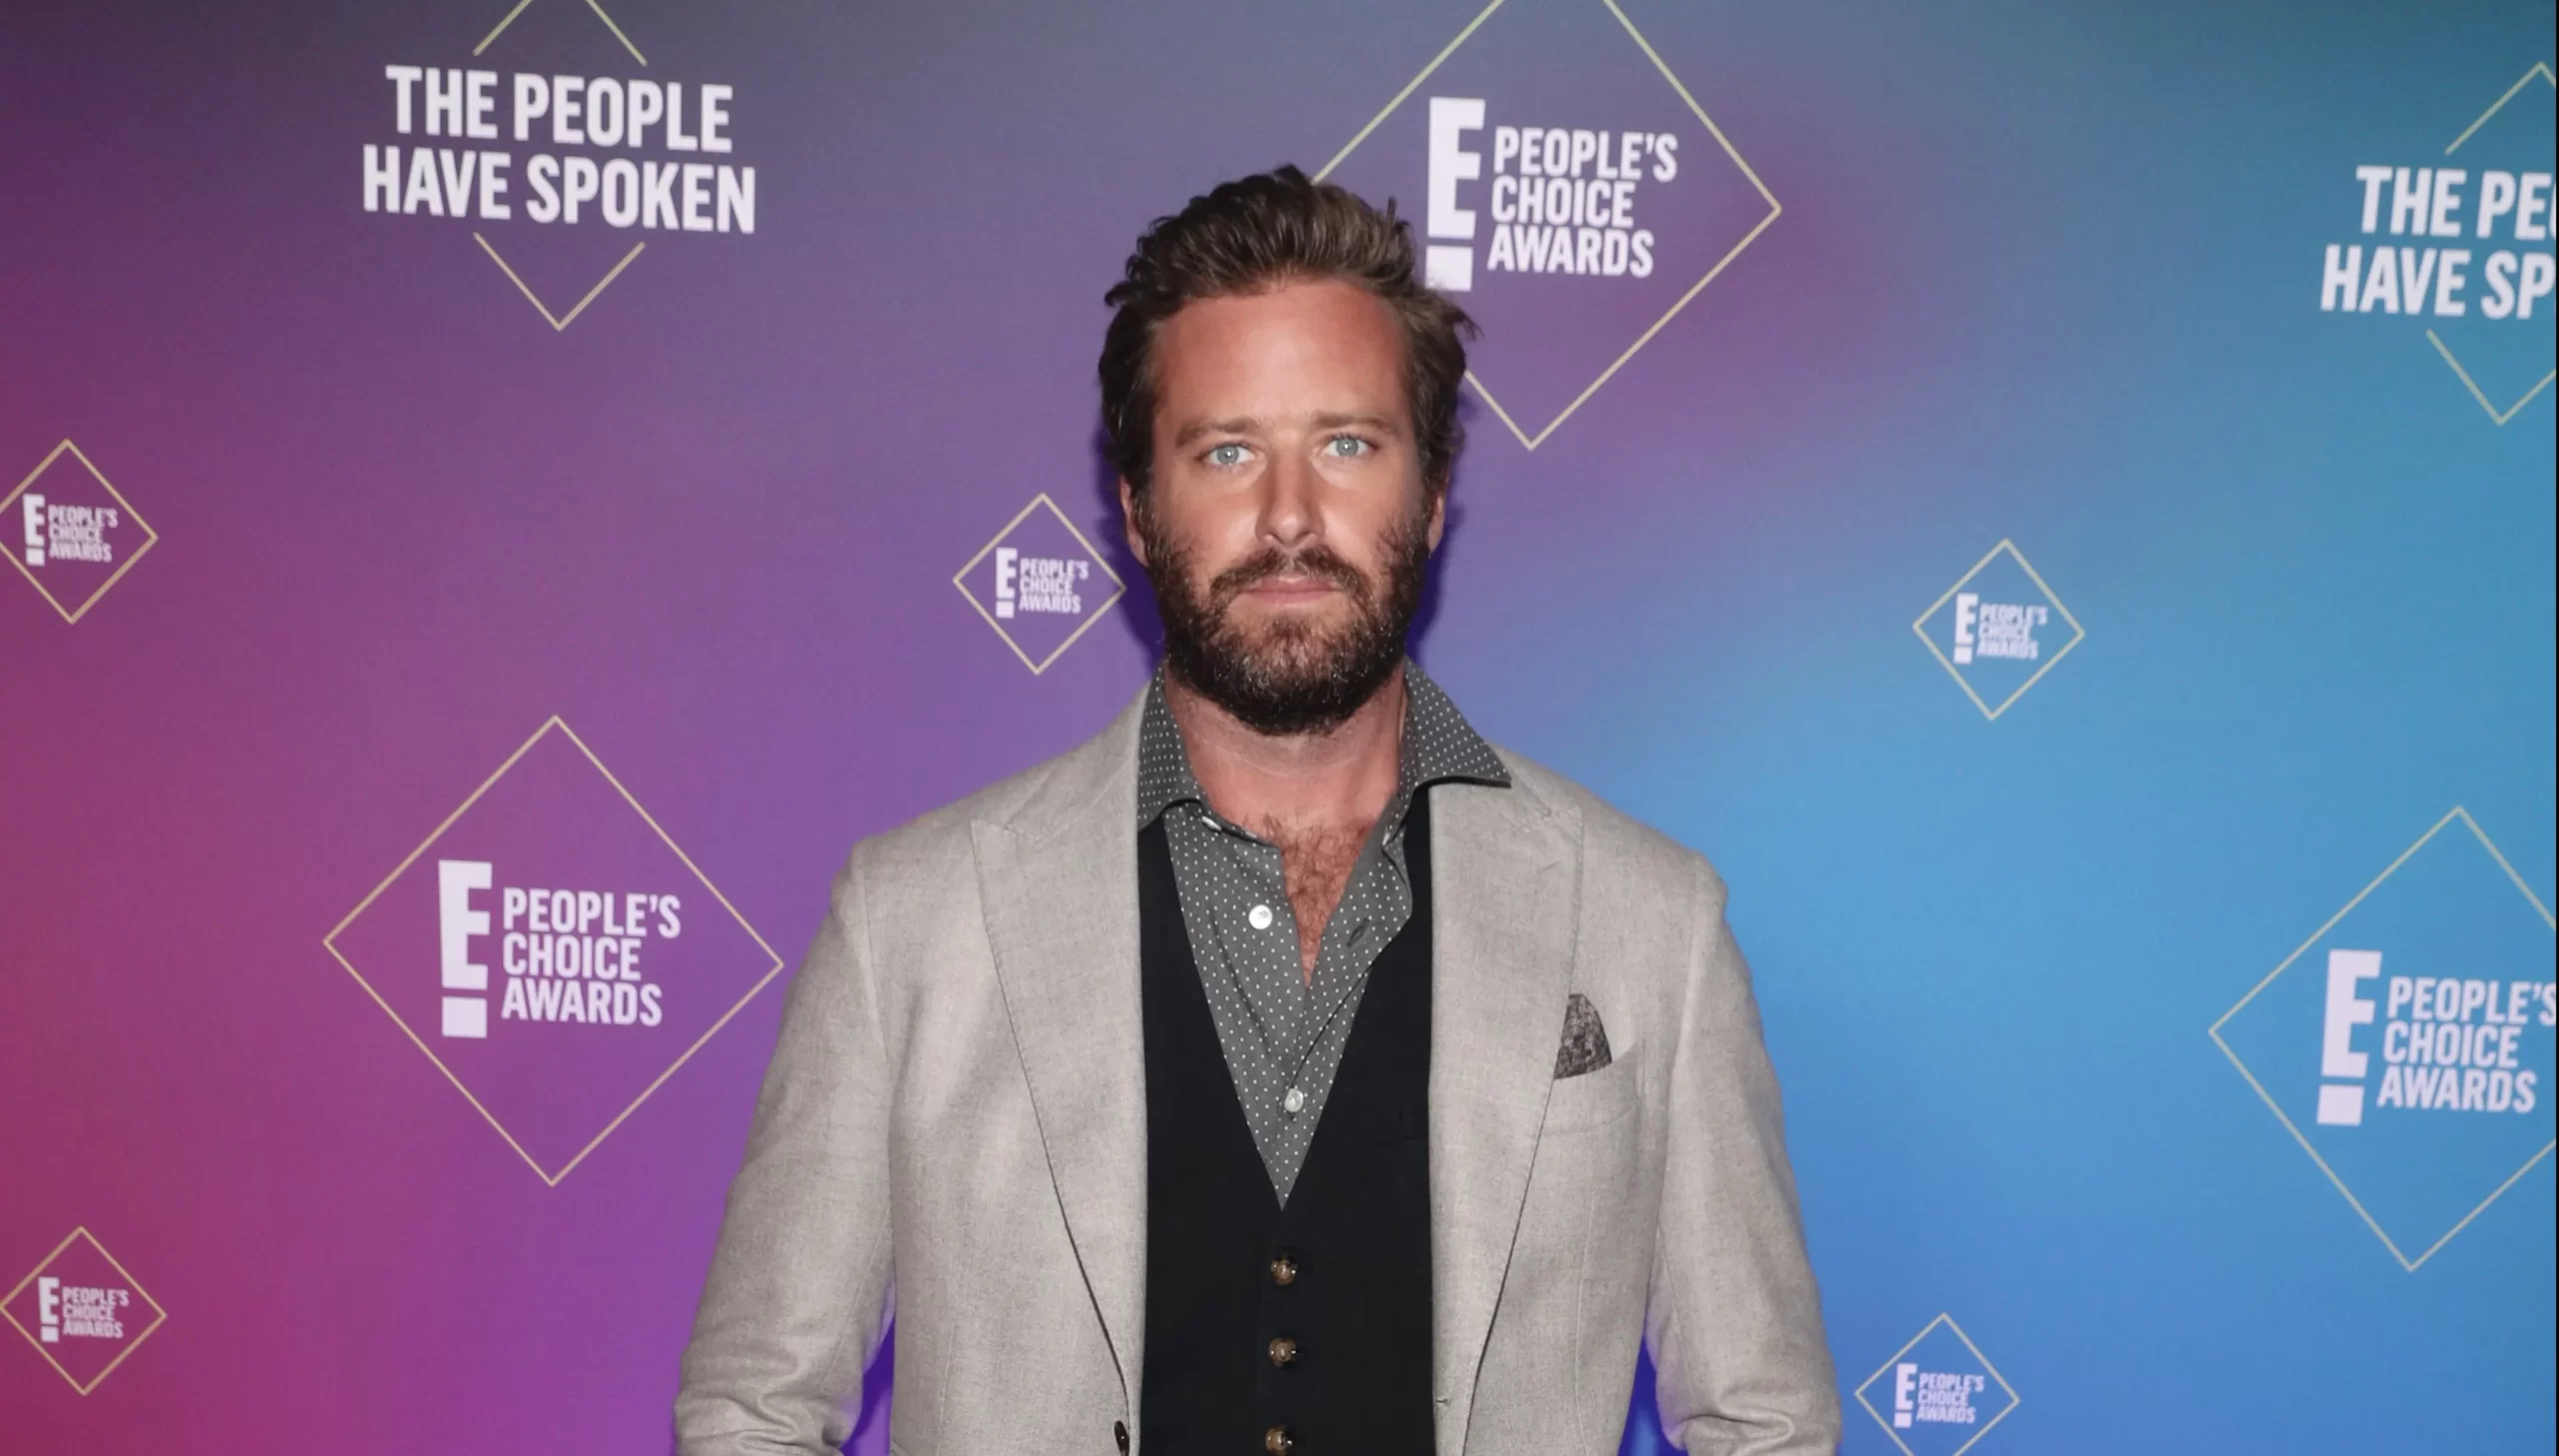 What is Armie Hammer famous for?